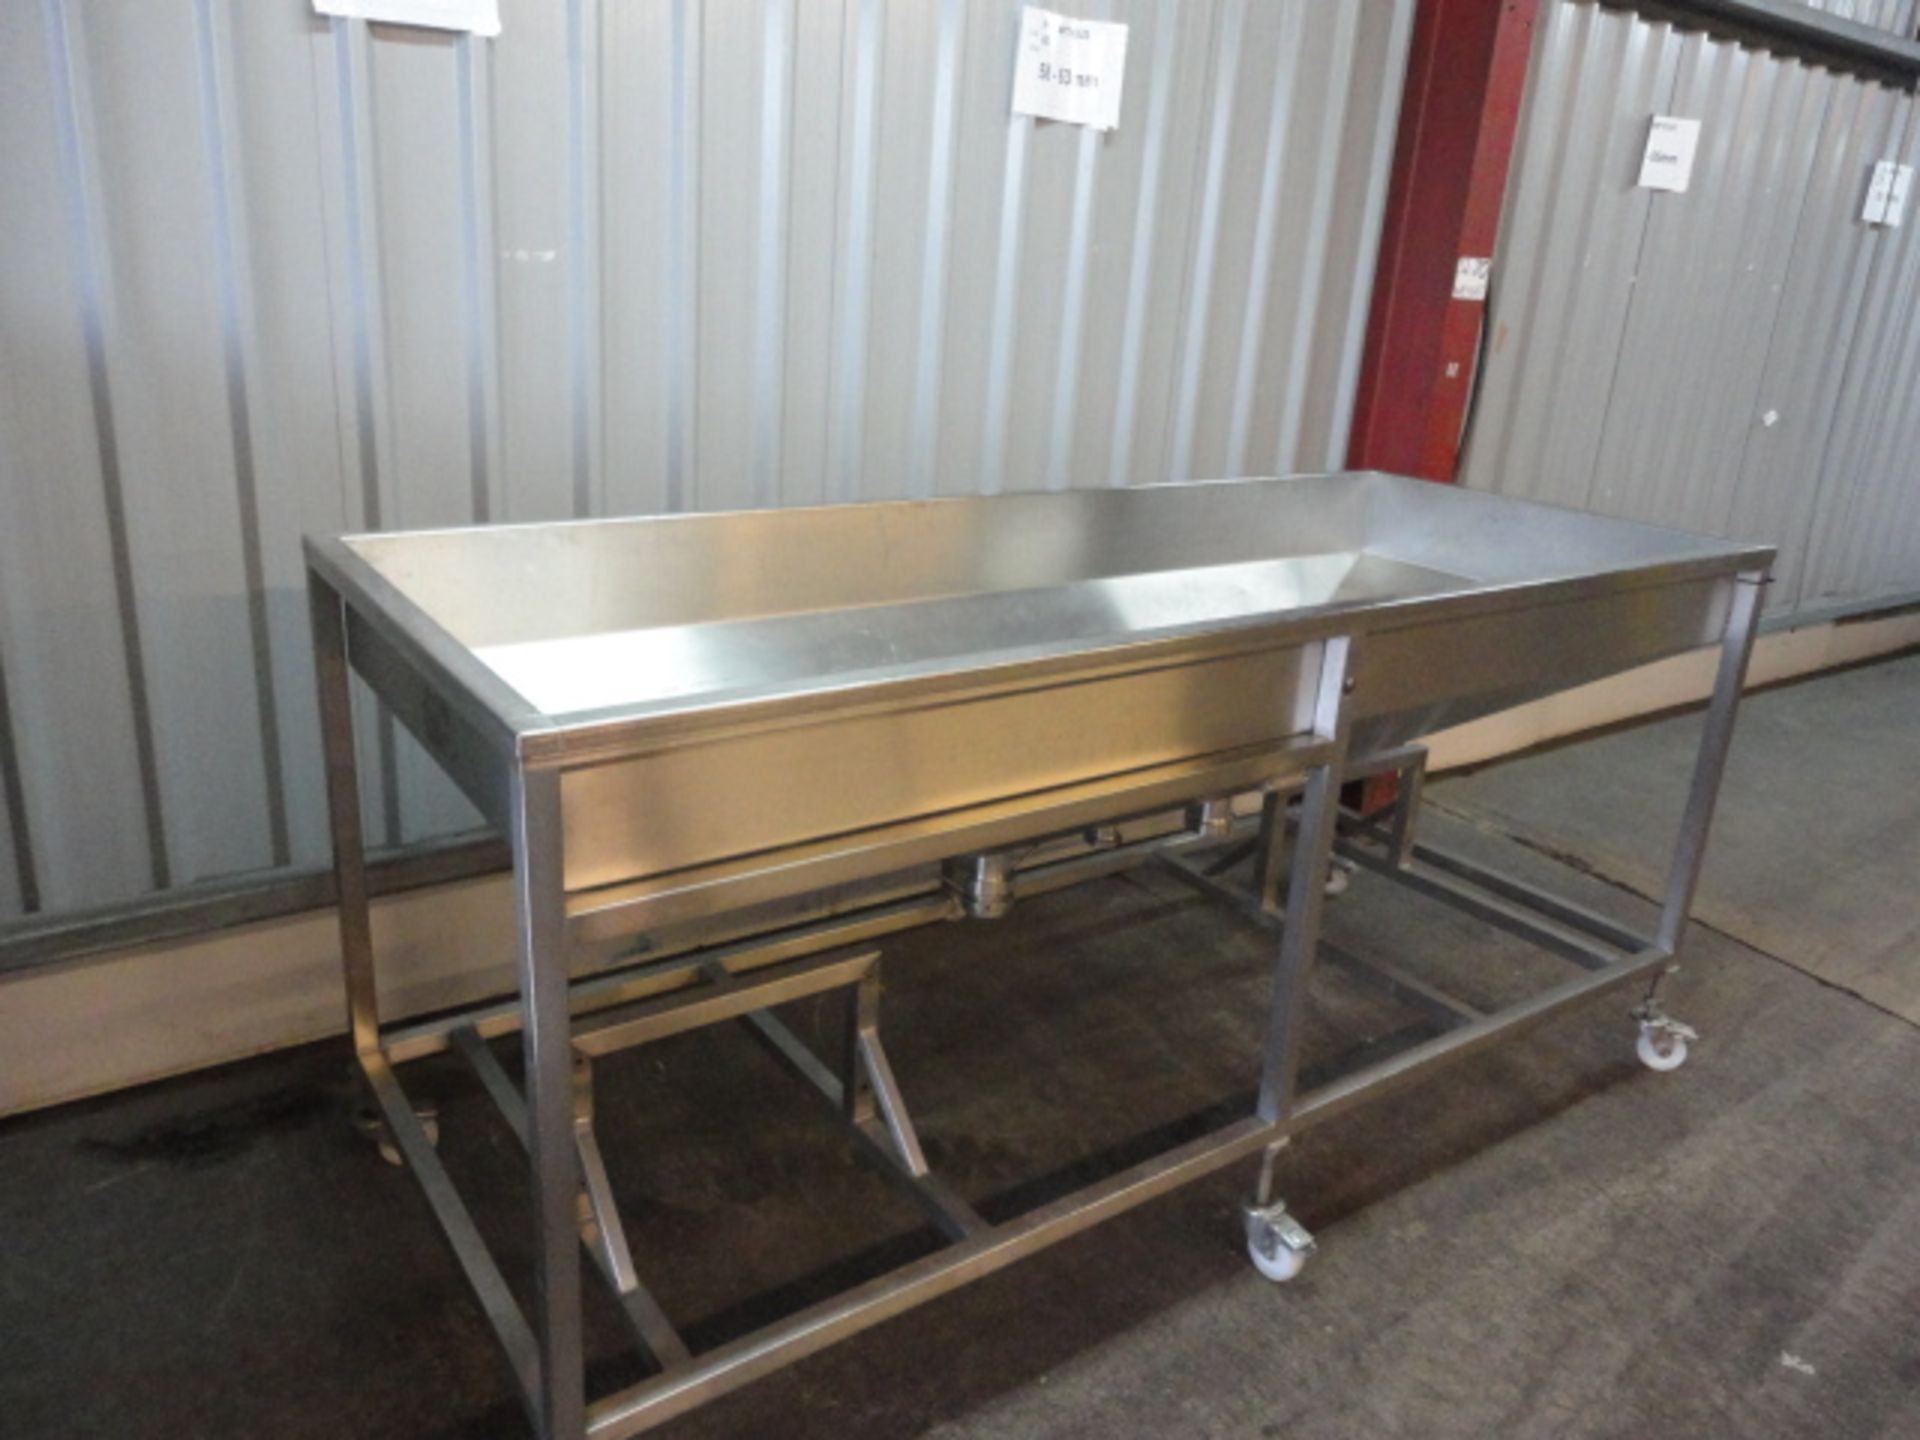 Stainless steel Trough/ WASH FLUME approx. 2500mm long x 1000mm front to back ON WHEELS LIFT OUT £30 - Image 2 of 3